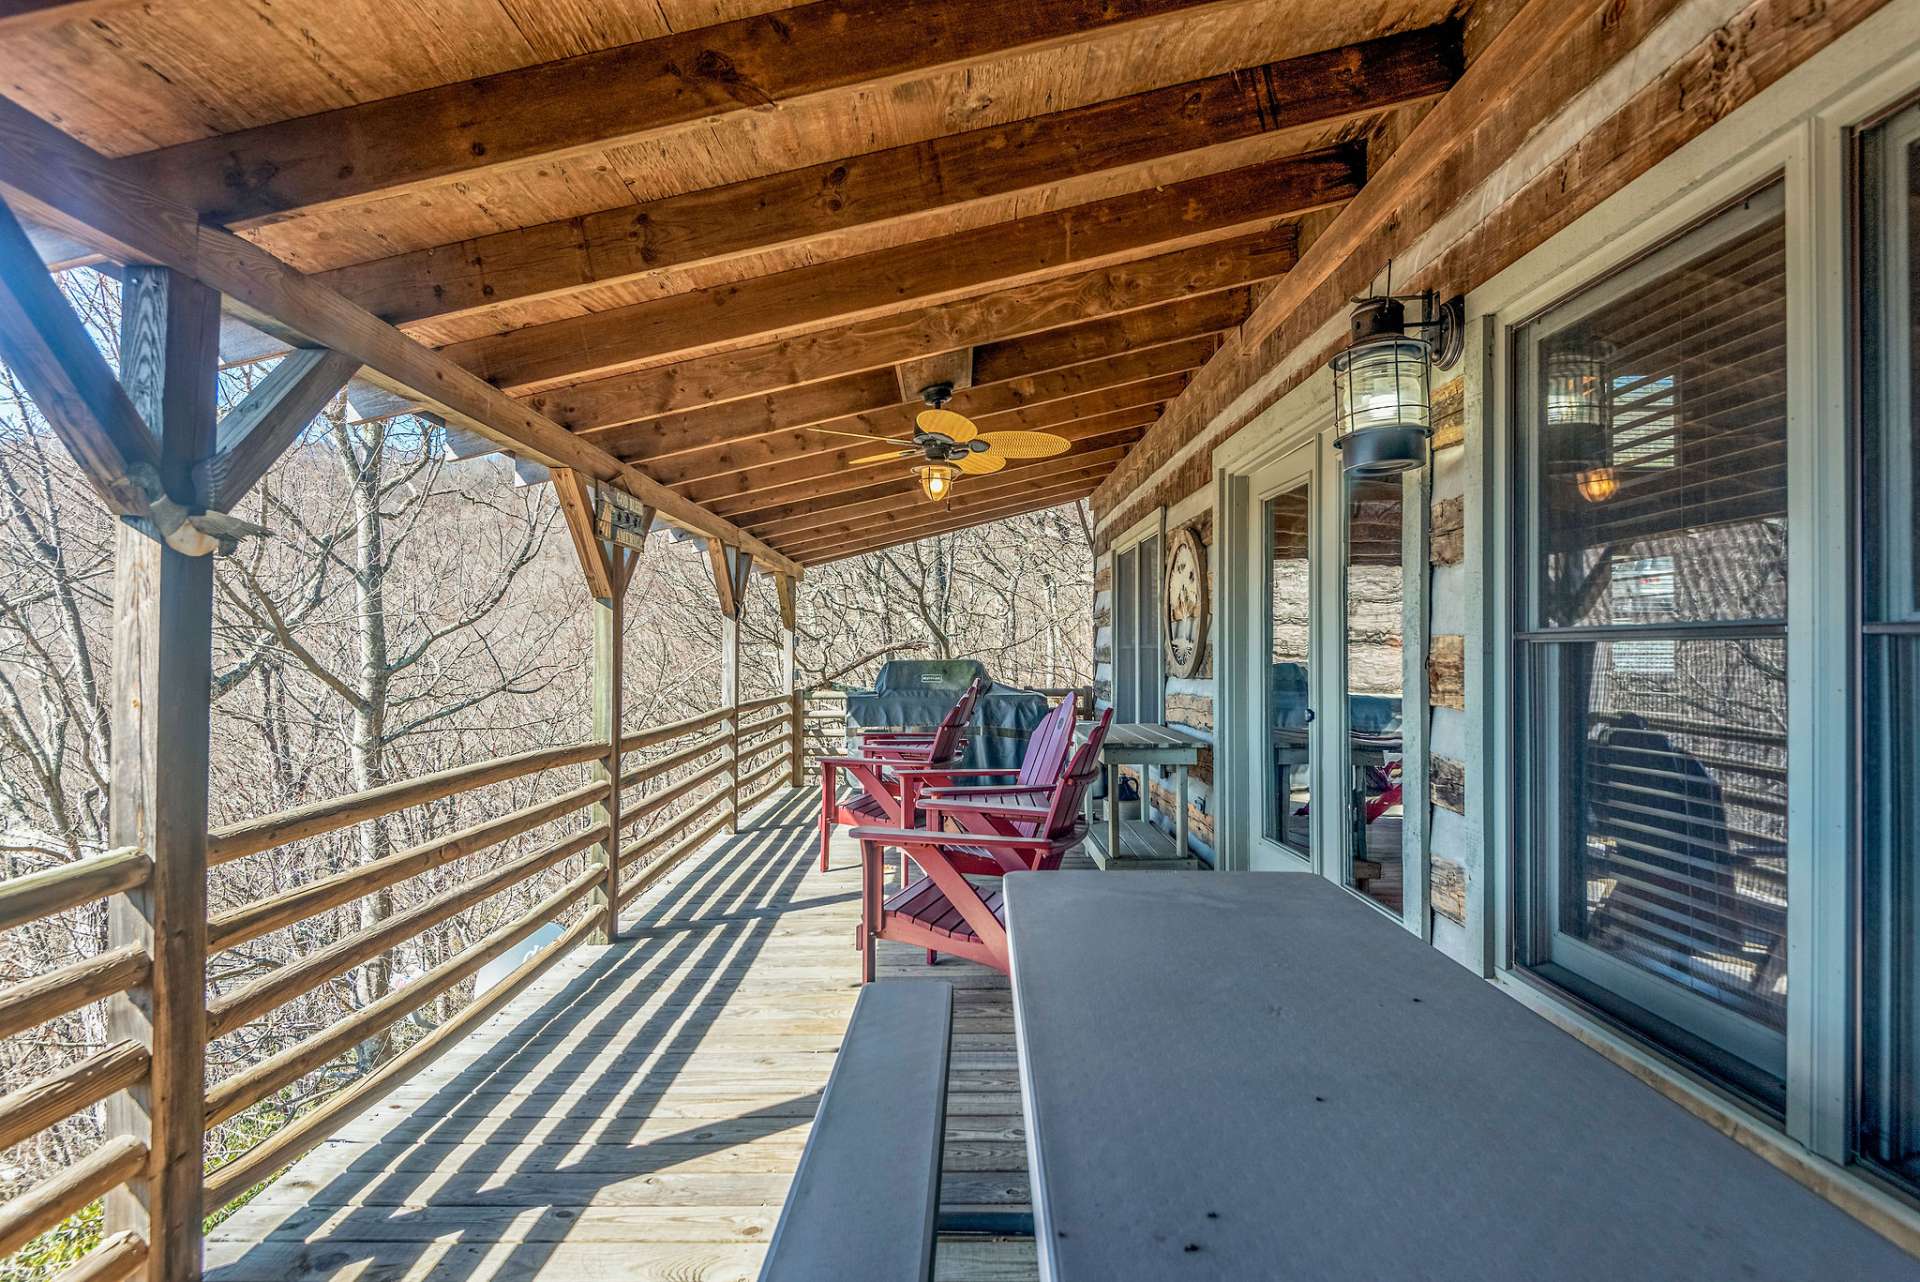 Expansive outdoor living area on the main covered deck. Perfect for all weather entertaining.